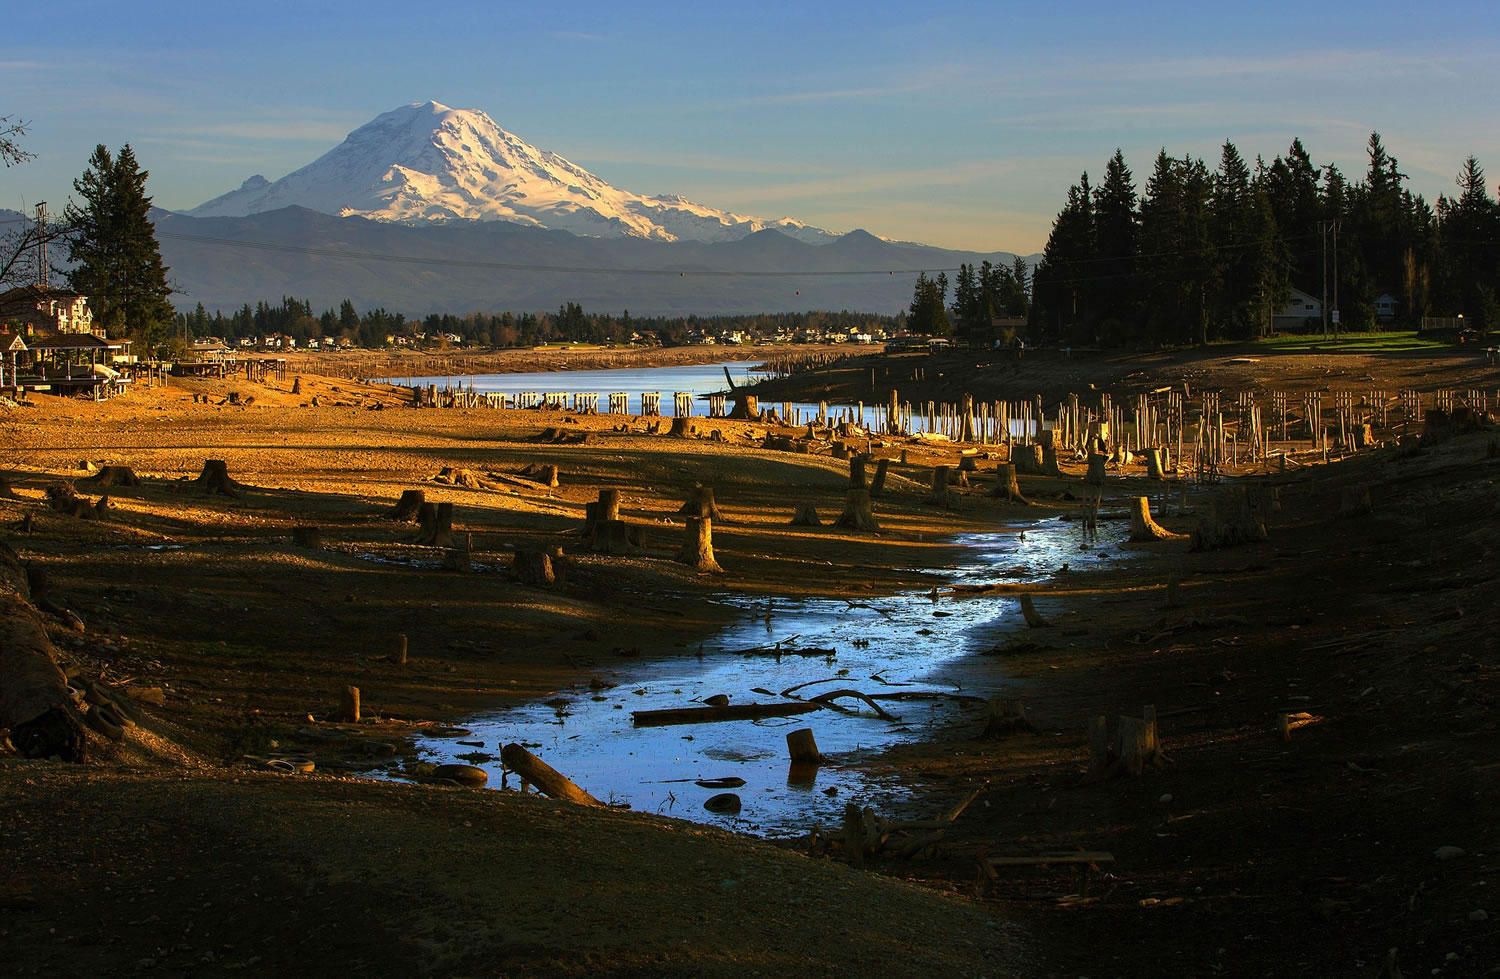 With Mount Rainier in the background, Lake Tapps near Sumner is shown in February 2015 with lowered water levels due to maintenance being done by the Cascade Water Alliance, which owns the lake.